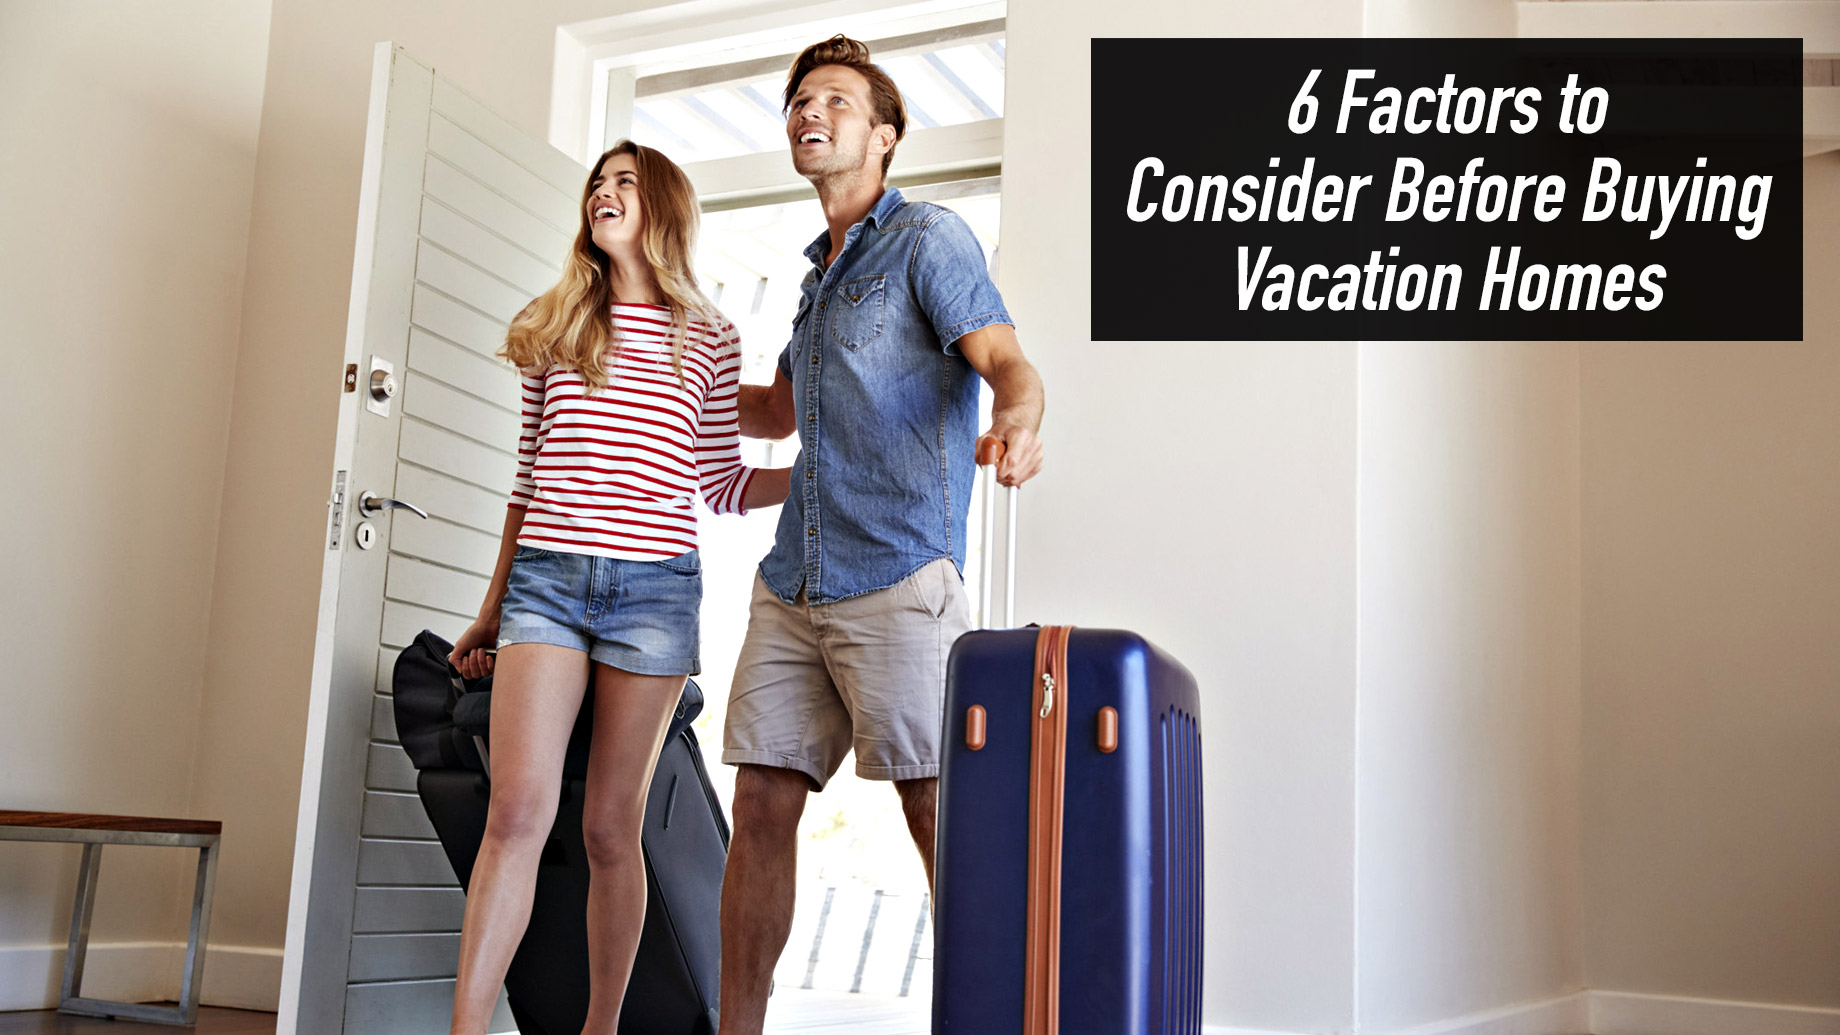 6 Factors to Consider Before Buying Vacation Homes